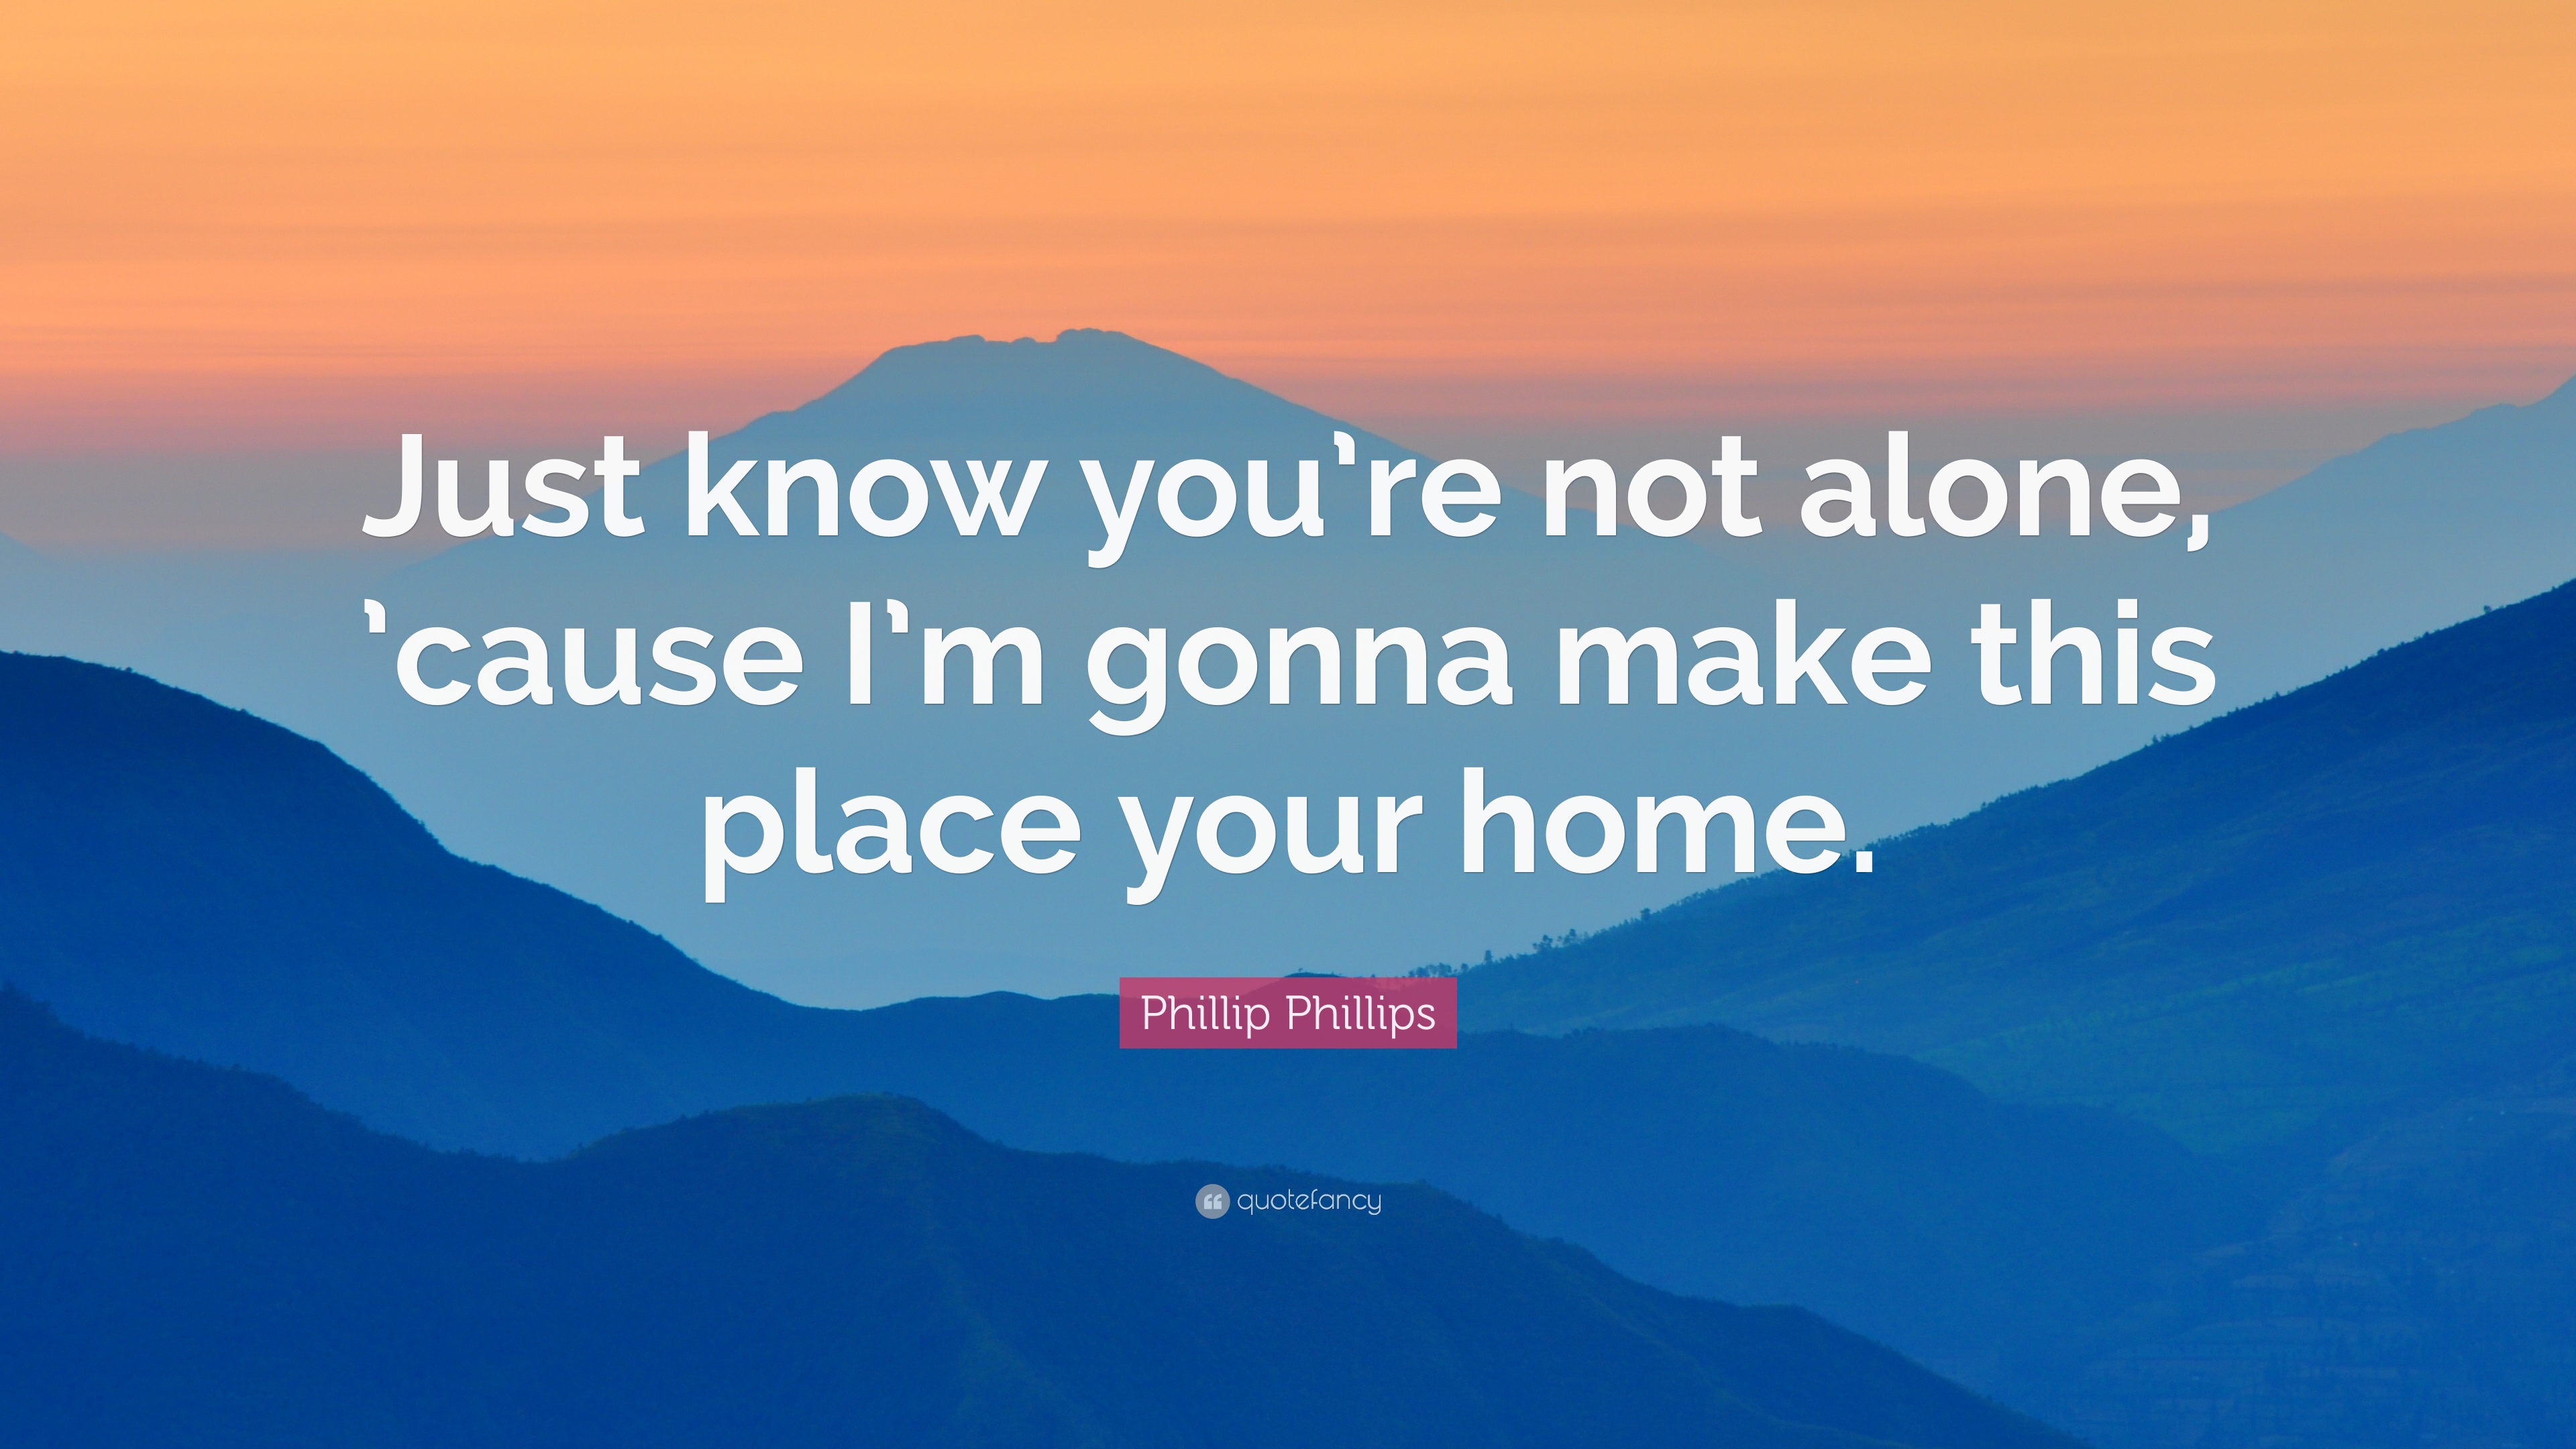 Phillip Phillips Quote: “Just know you're not alone, 'cause I'm